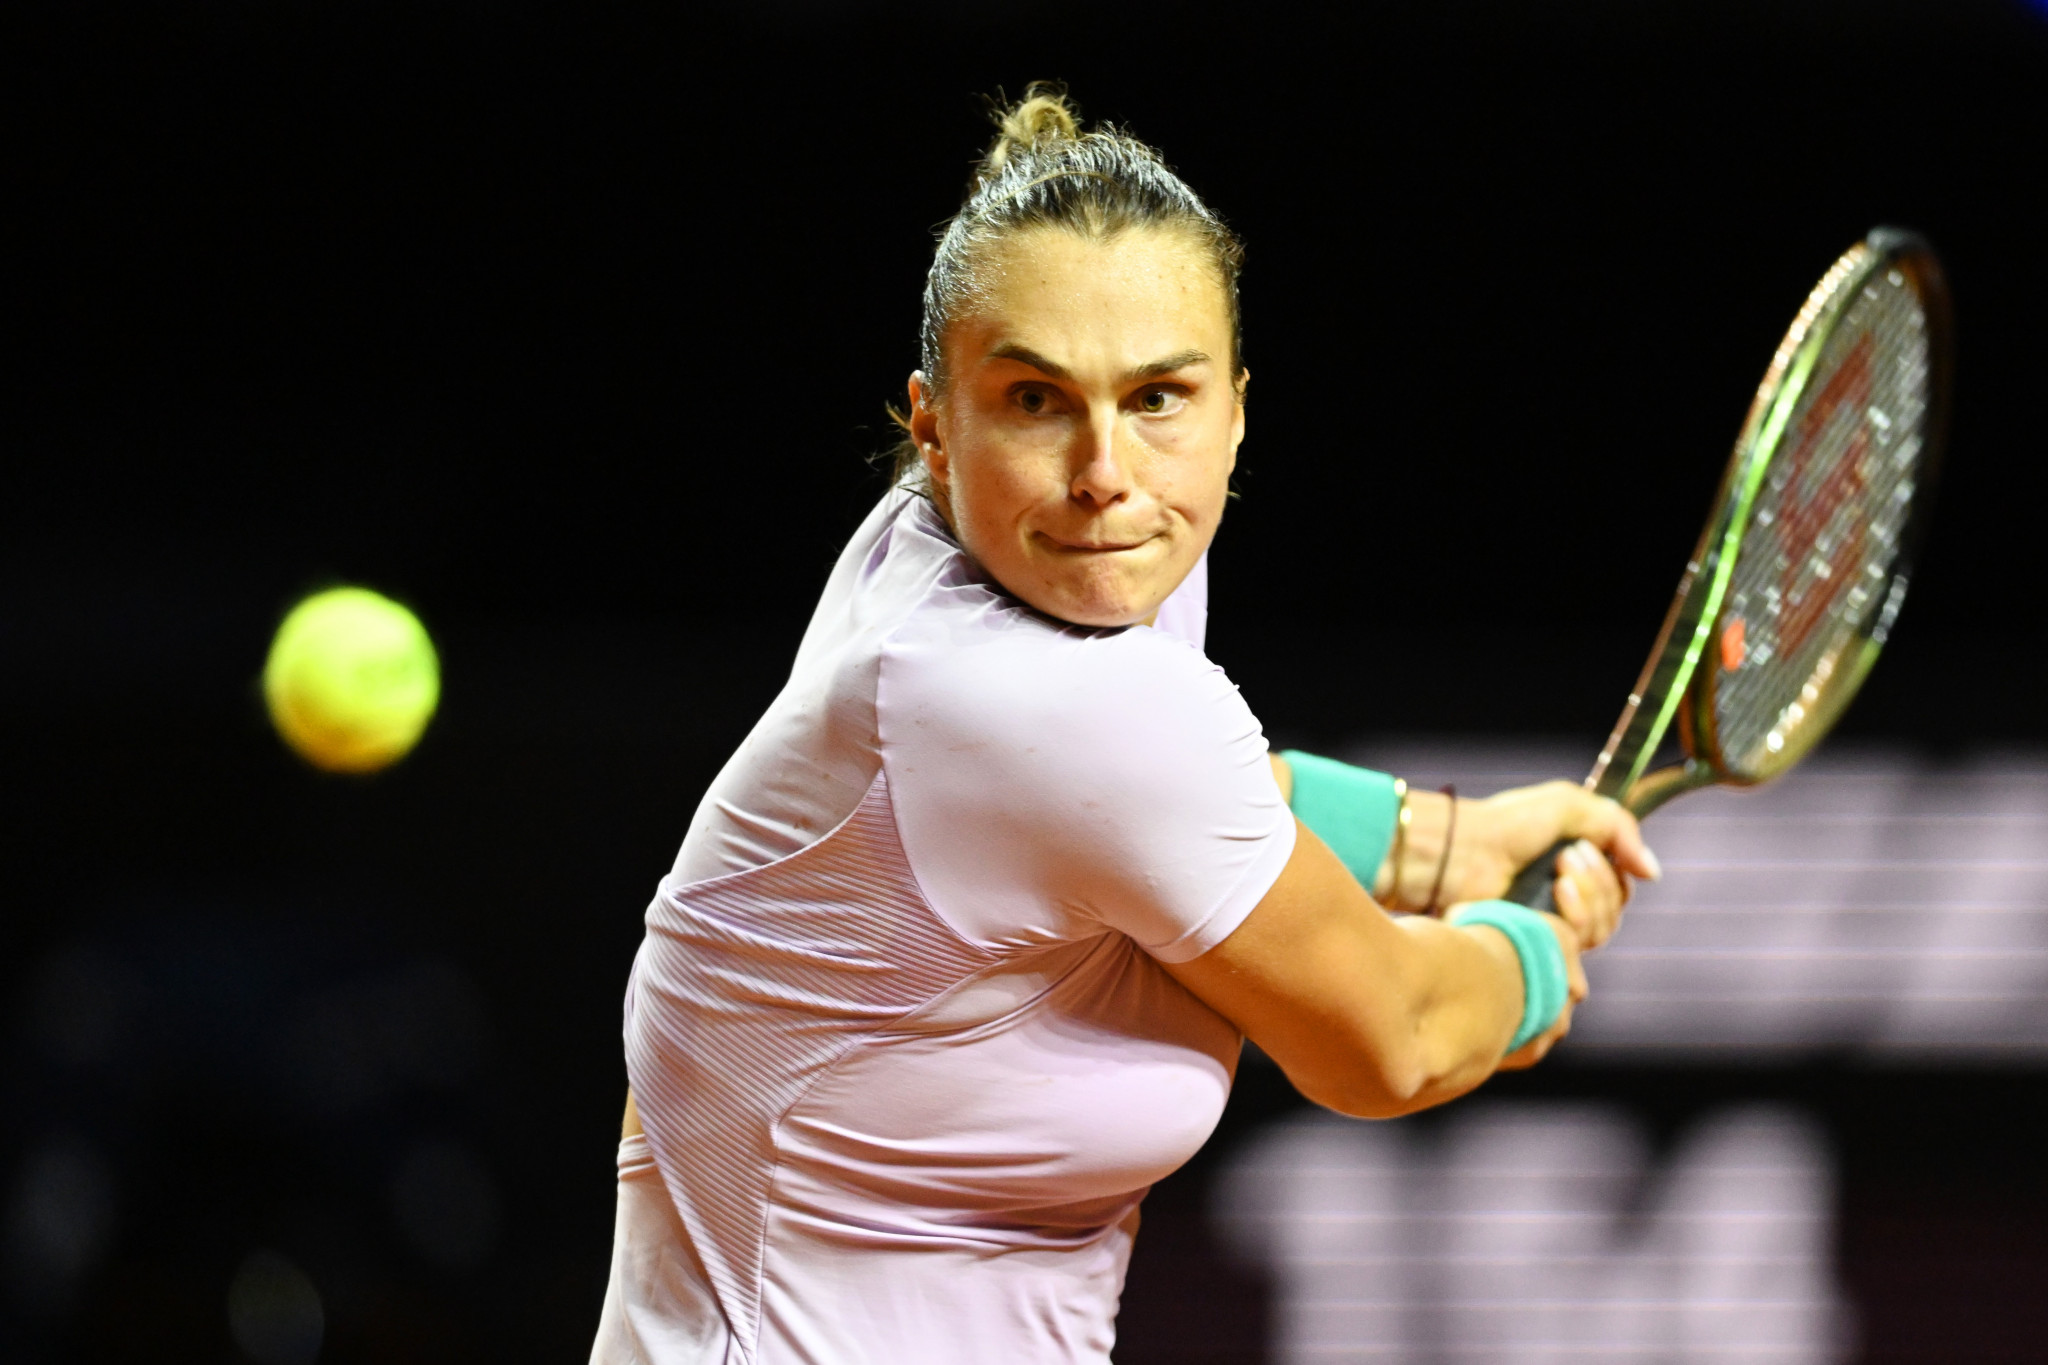 Belarus' Aryna Sabalenka is among the players potentially facing a ban from Wimbledon ©Getty Images